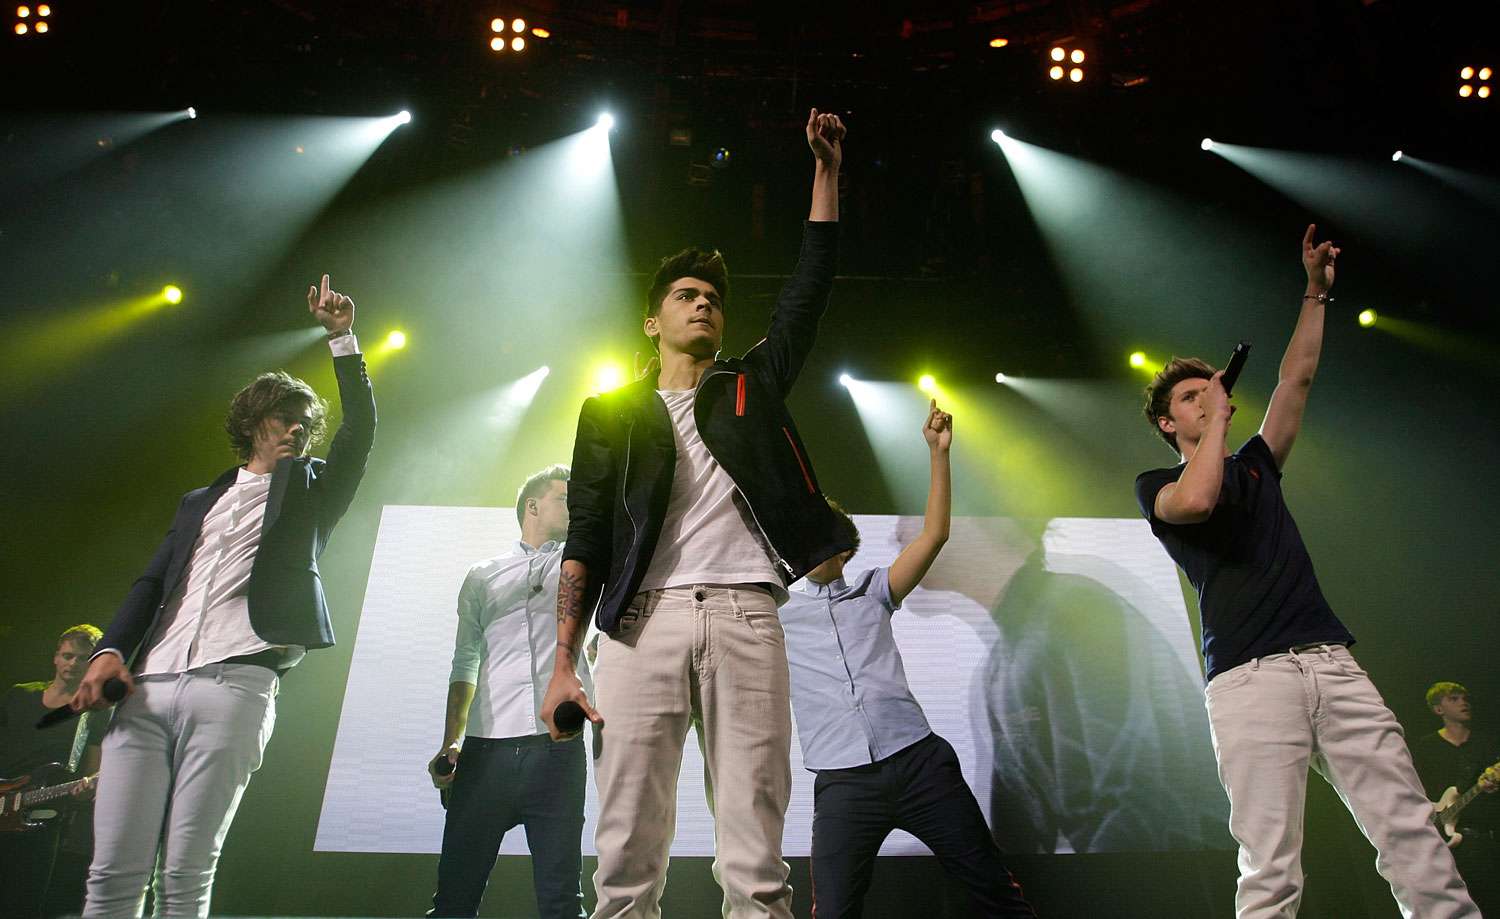 Harry Styles, Louis Tomlinson, Zayn Malik, Liam Payne and Niall Horan of One Direction perform on stage at The Roundhouse on September 20, 2012 in London, United Kingdom.